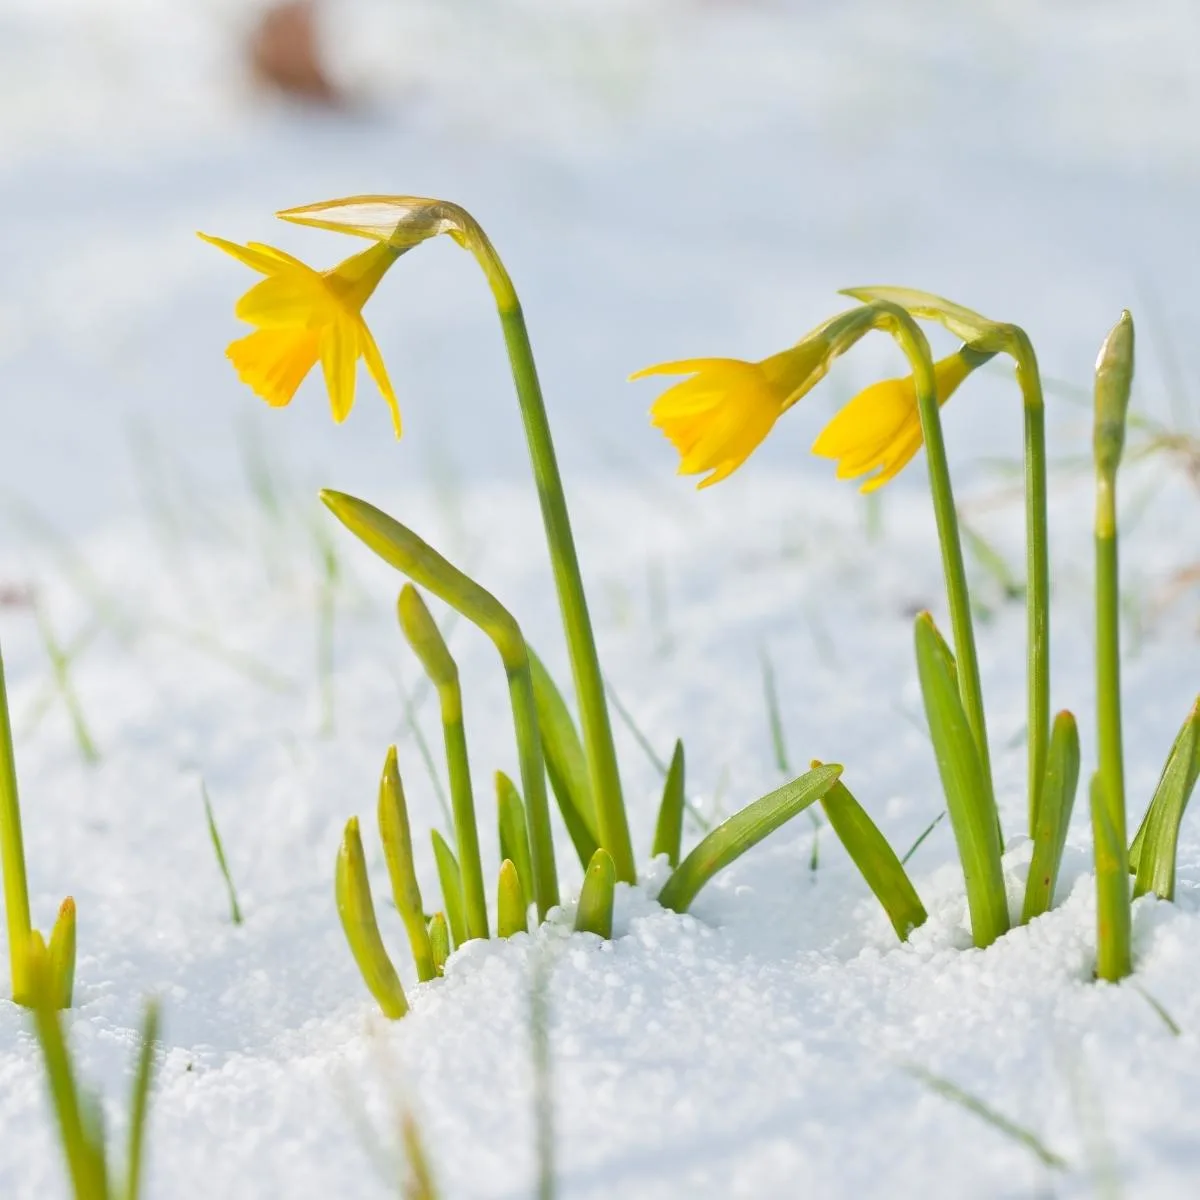 daffodils growing through the snow